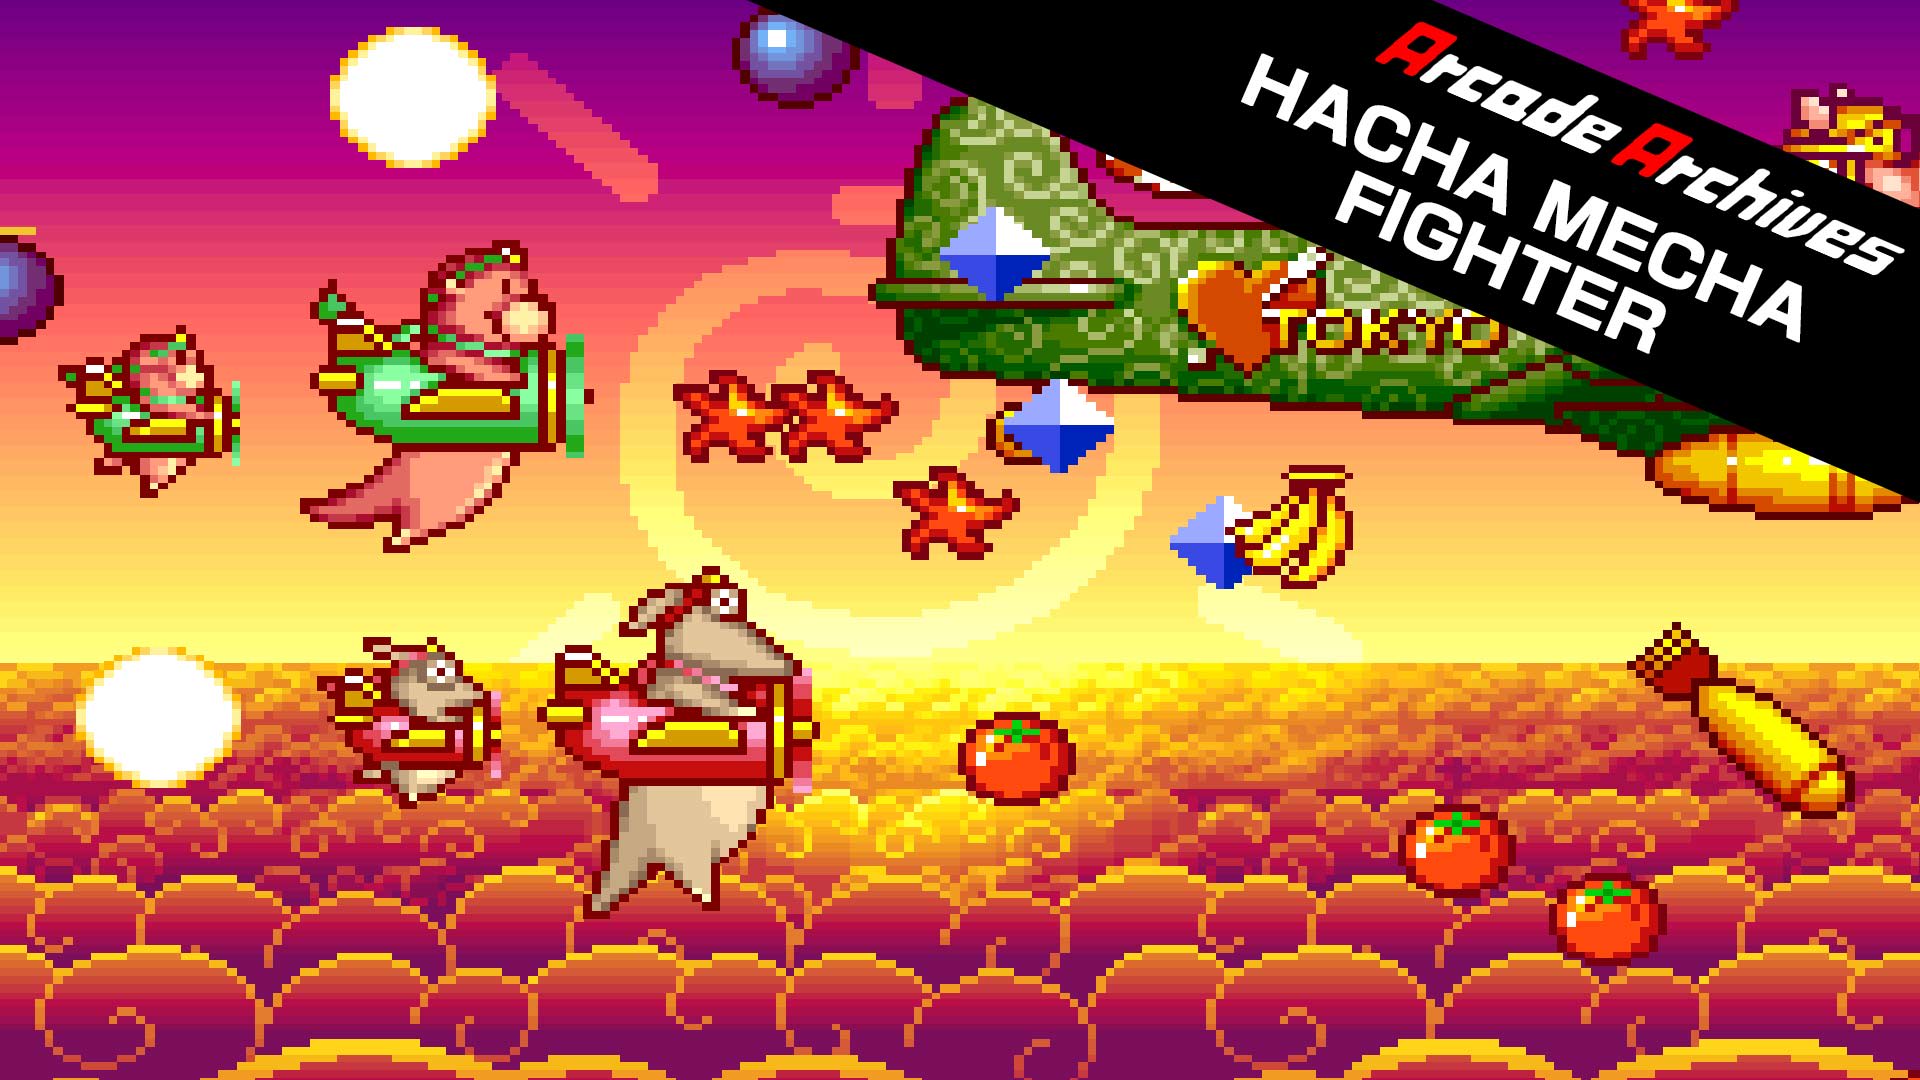 Arcade Archives HACHA MECHA FIGHTER 1